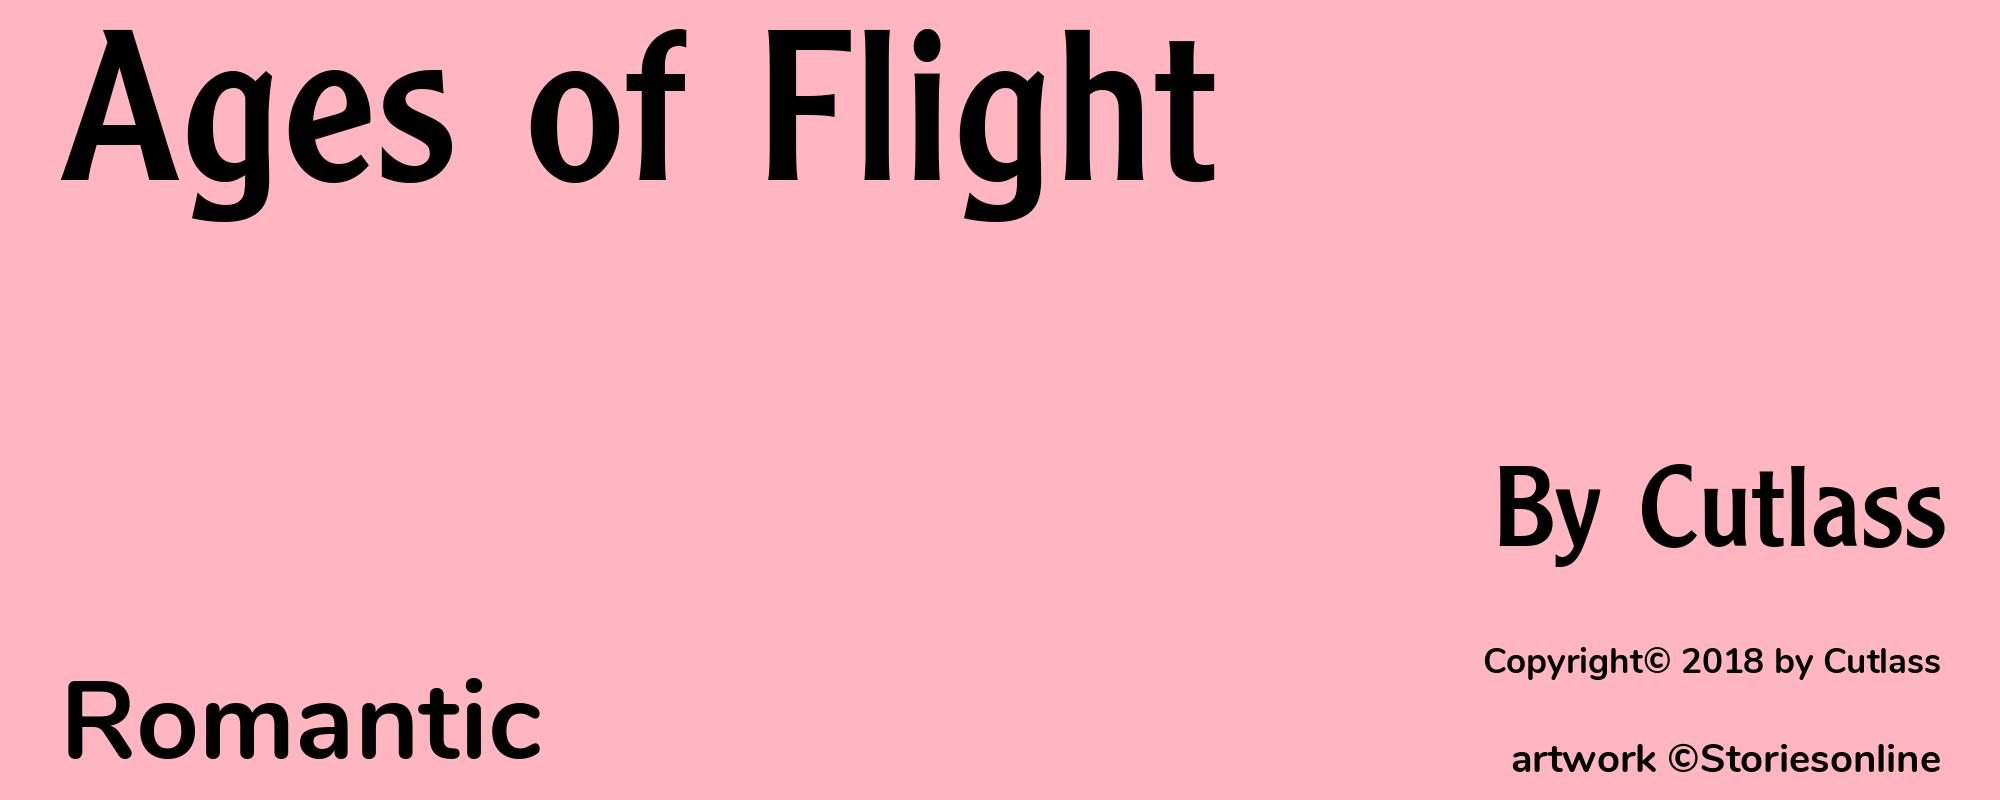 Ages of Flight - Cover